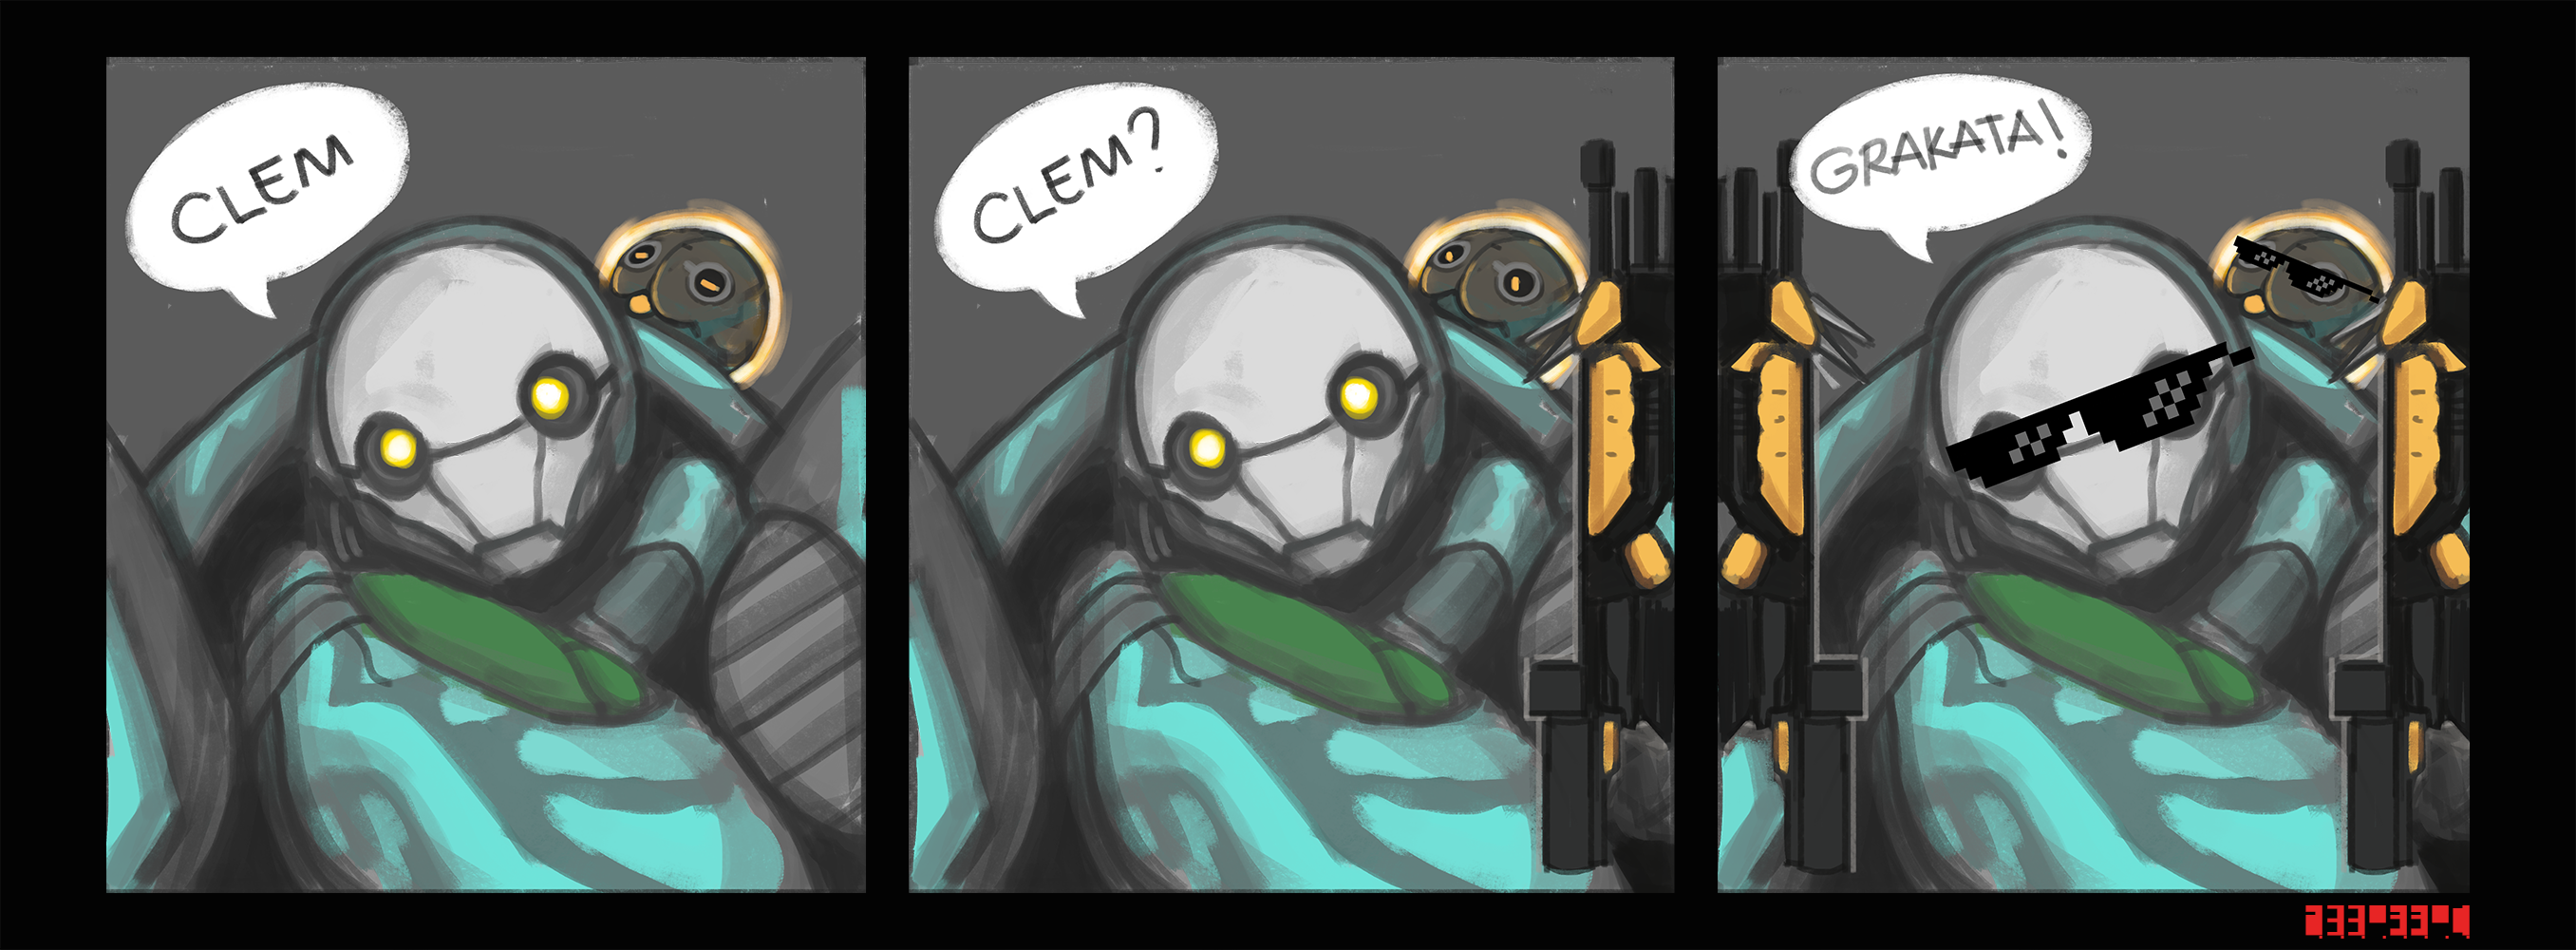 CLEM - Off Topic - Warframe Forums